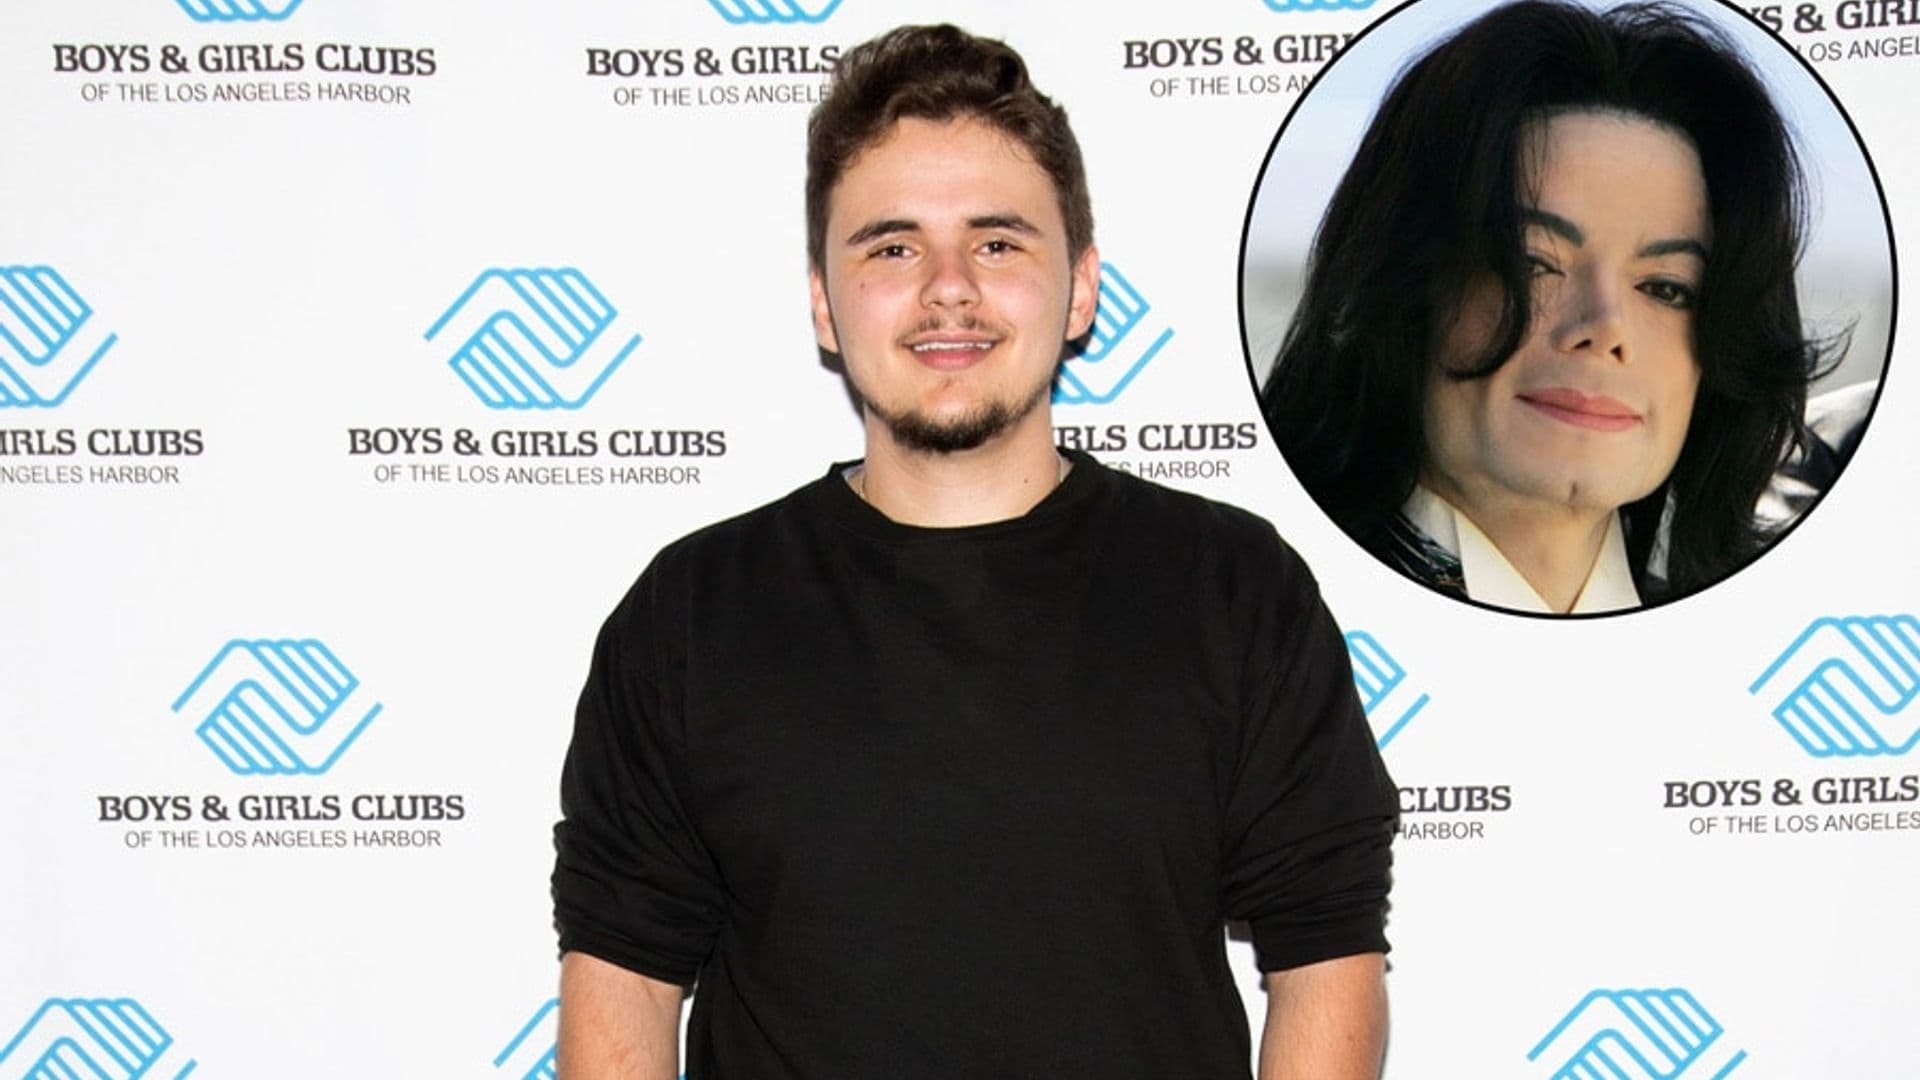 Prince Jackson calls father Michael Jackson his inspiration in rare interview